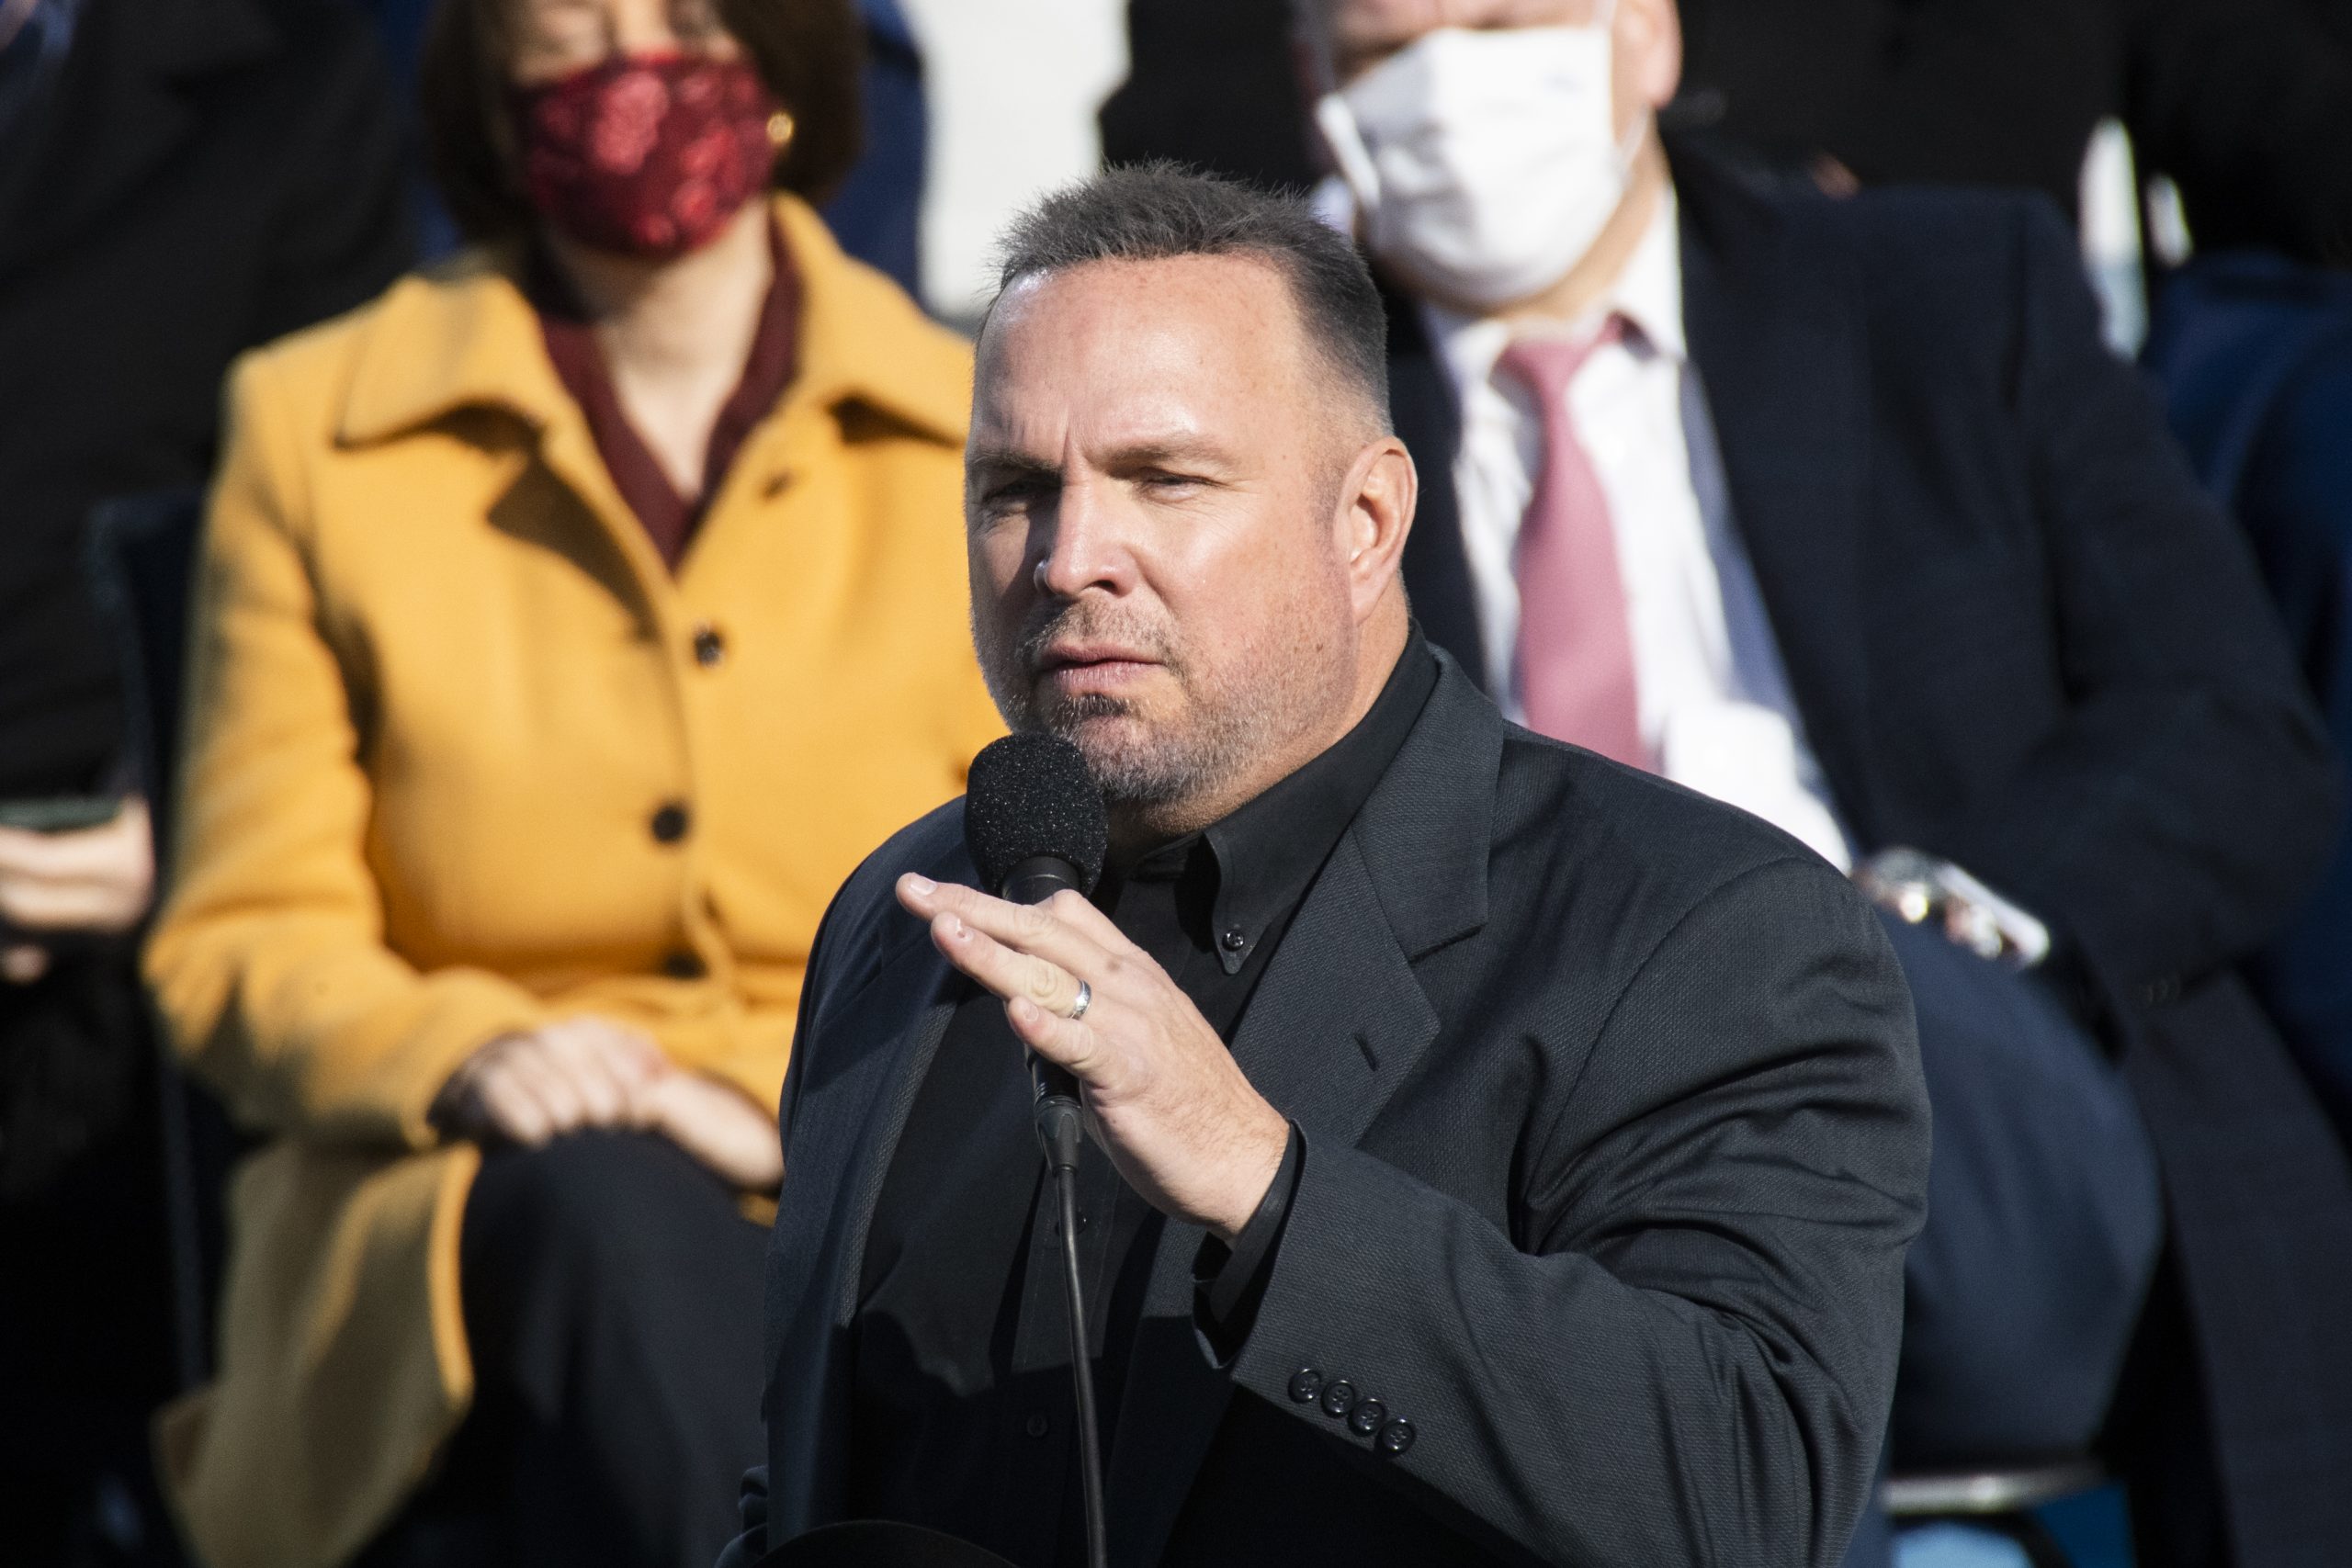 UNITED STATES - JANUARY 20: Garth Brooks performs  at the inauguration after Joe Biden was sworn in...